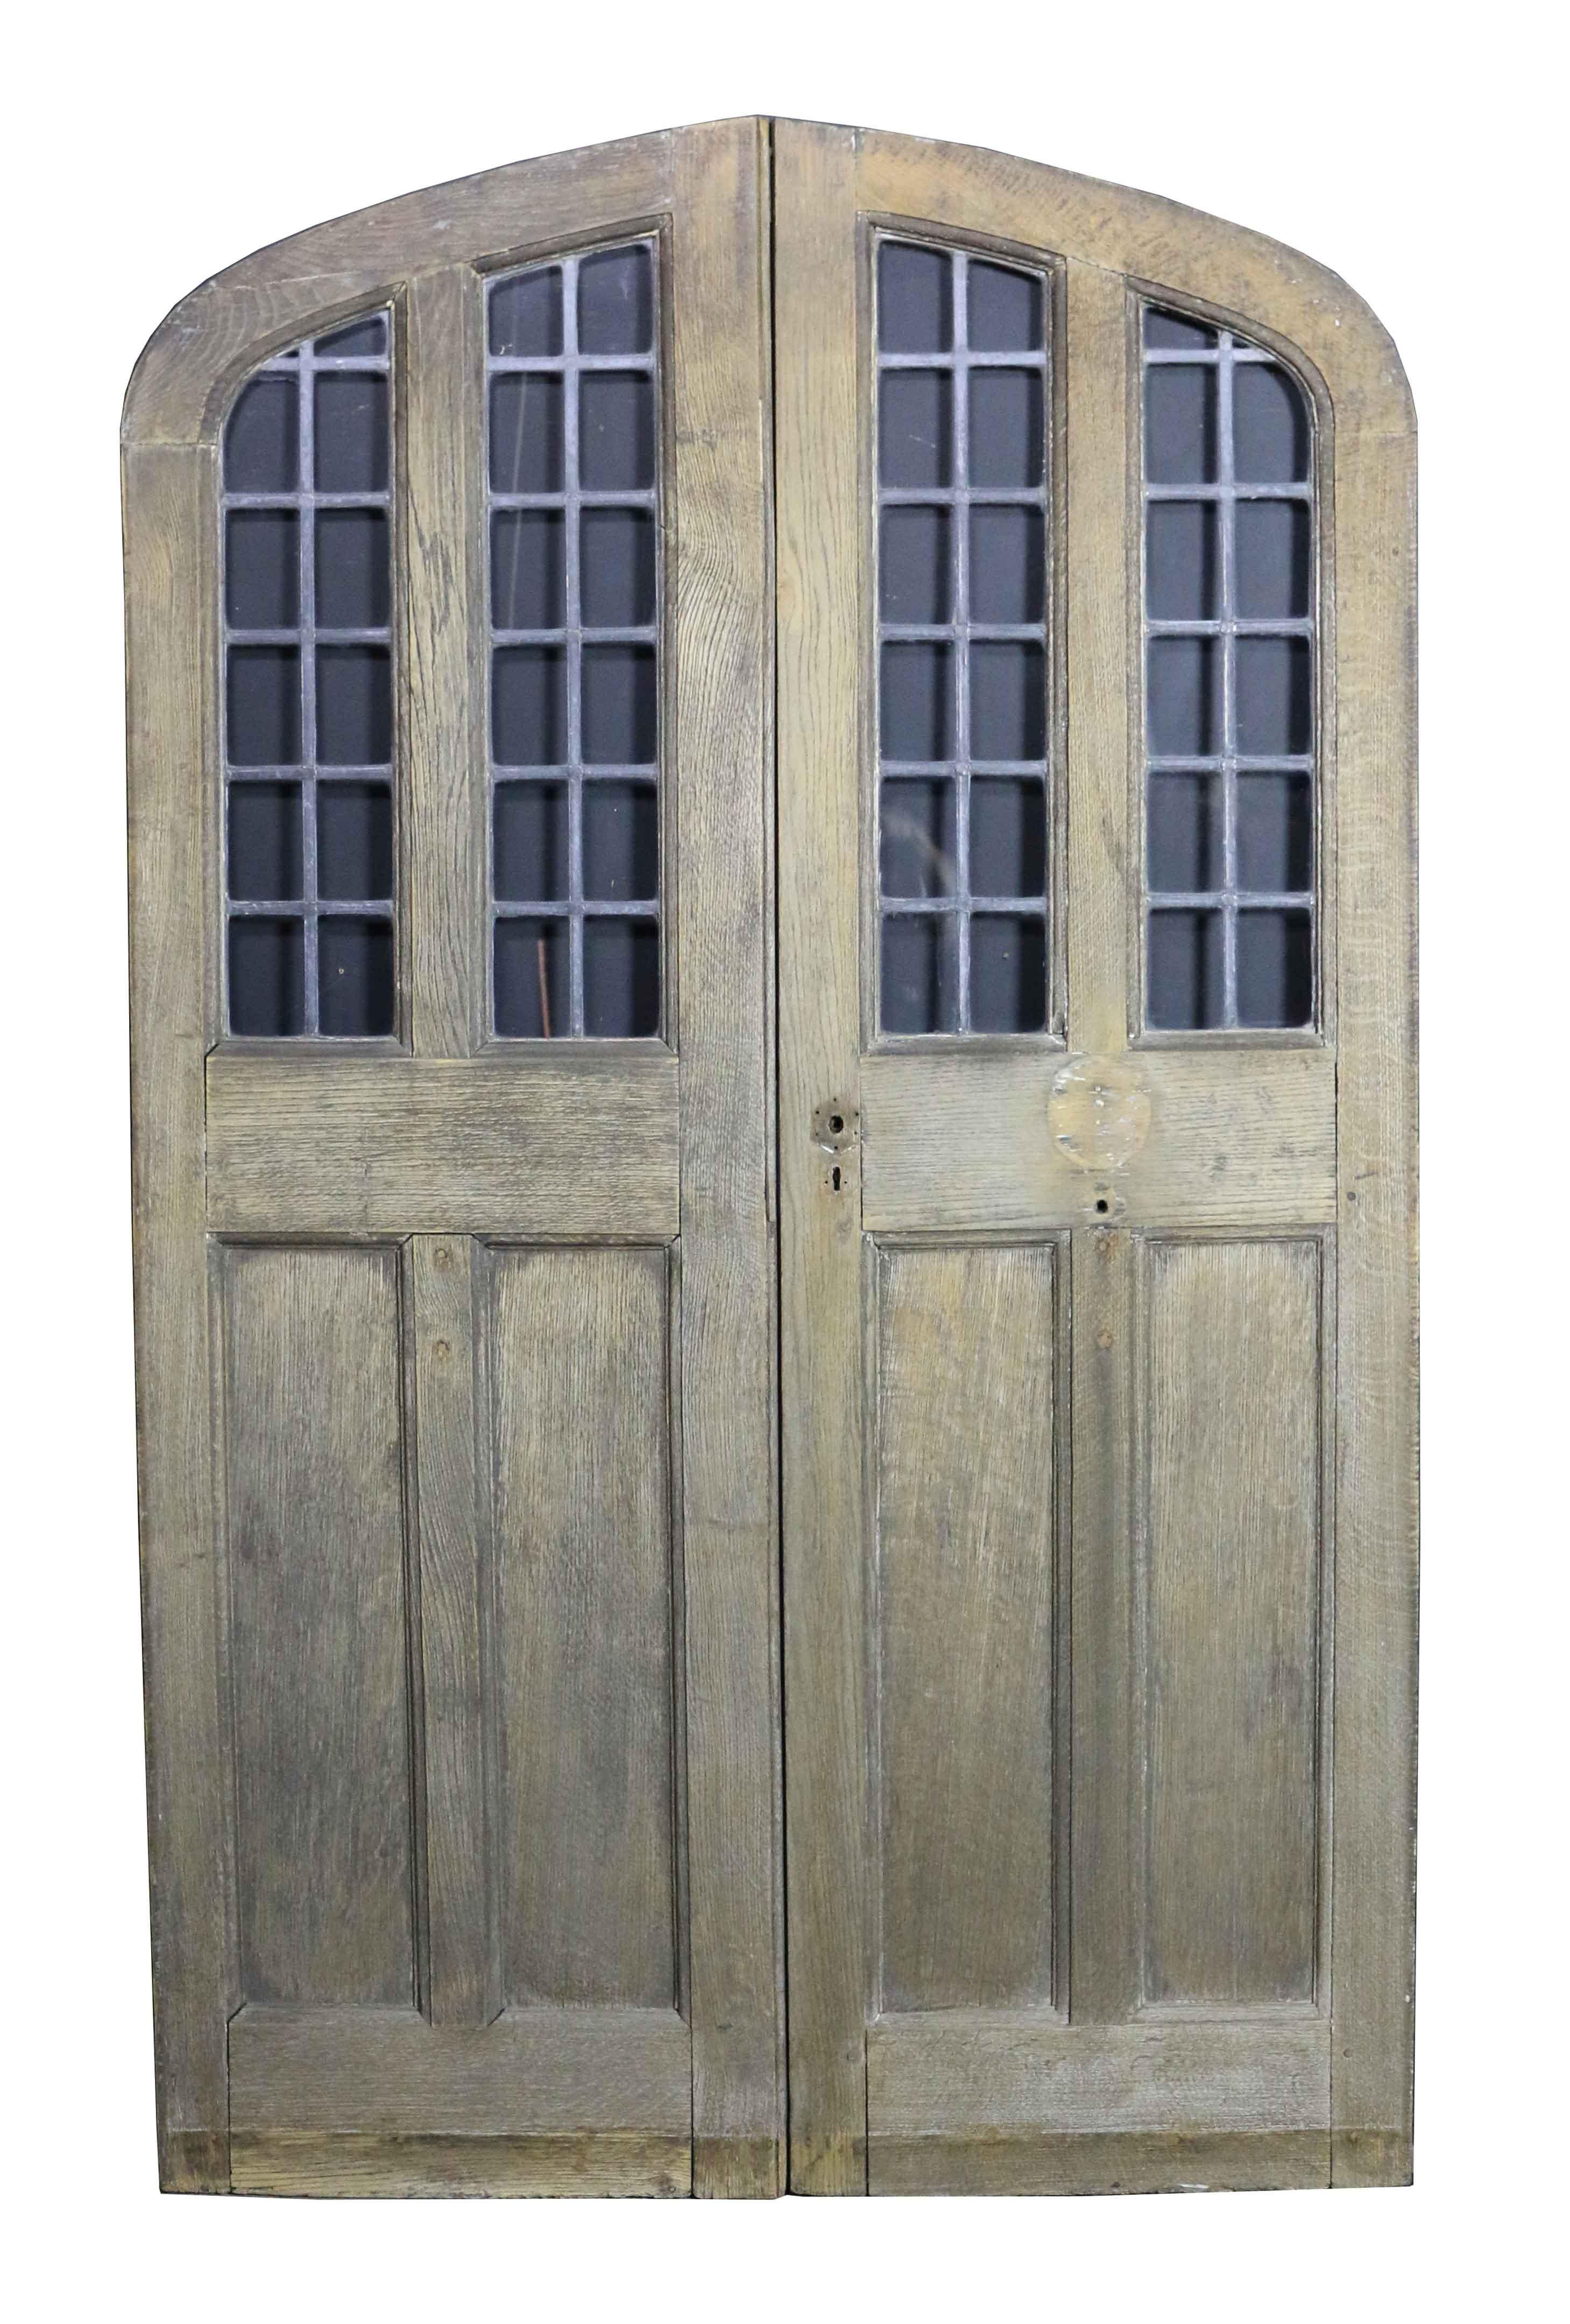 English Pair of Arched Oak Double Doors with Leaded Glass Panel, circa 1900